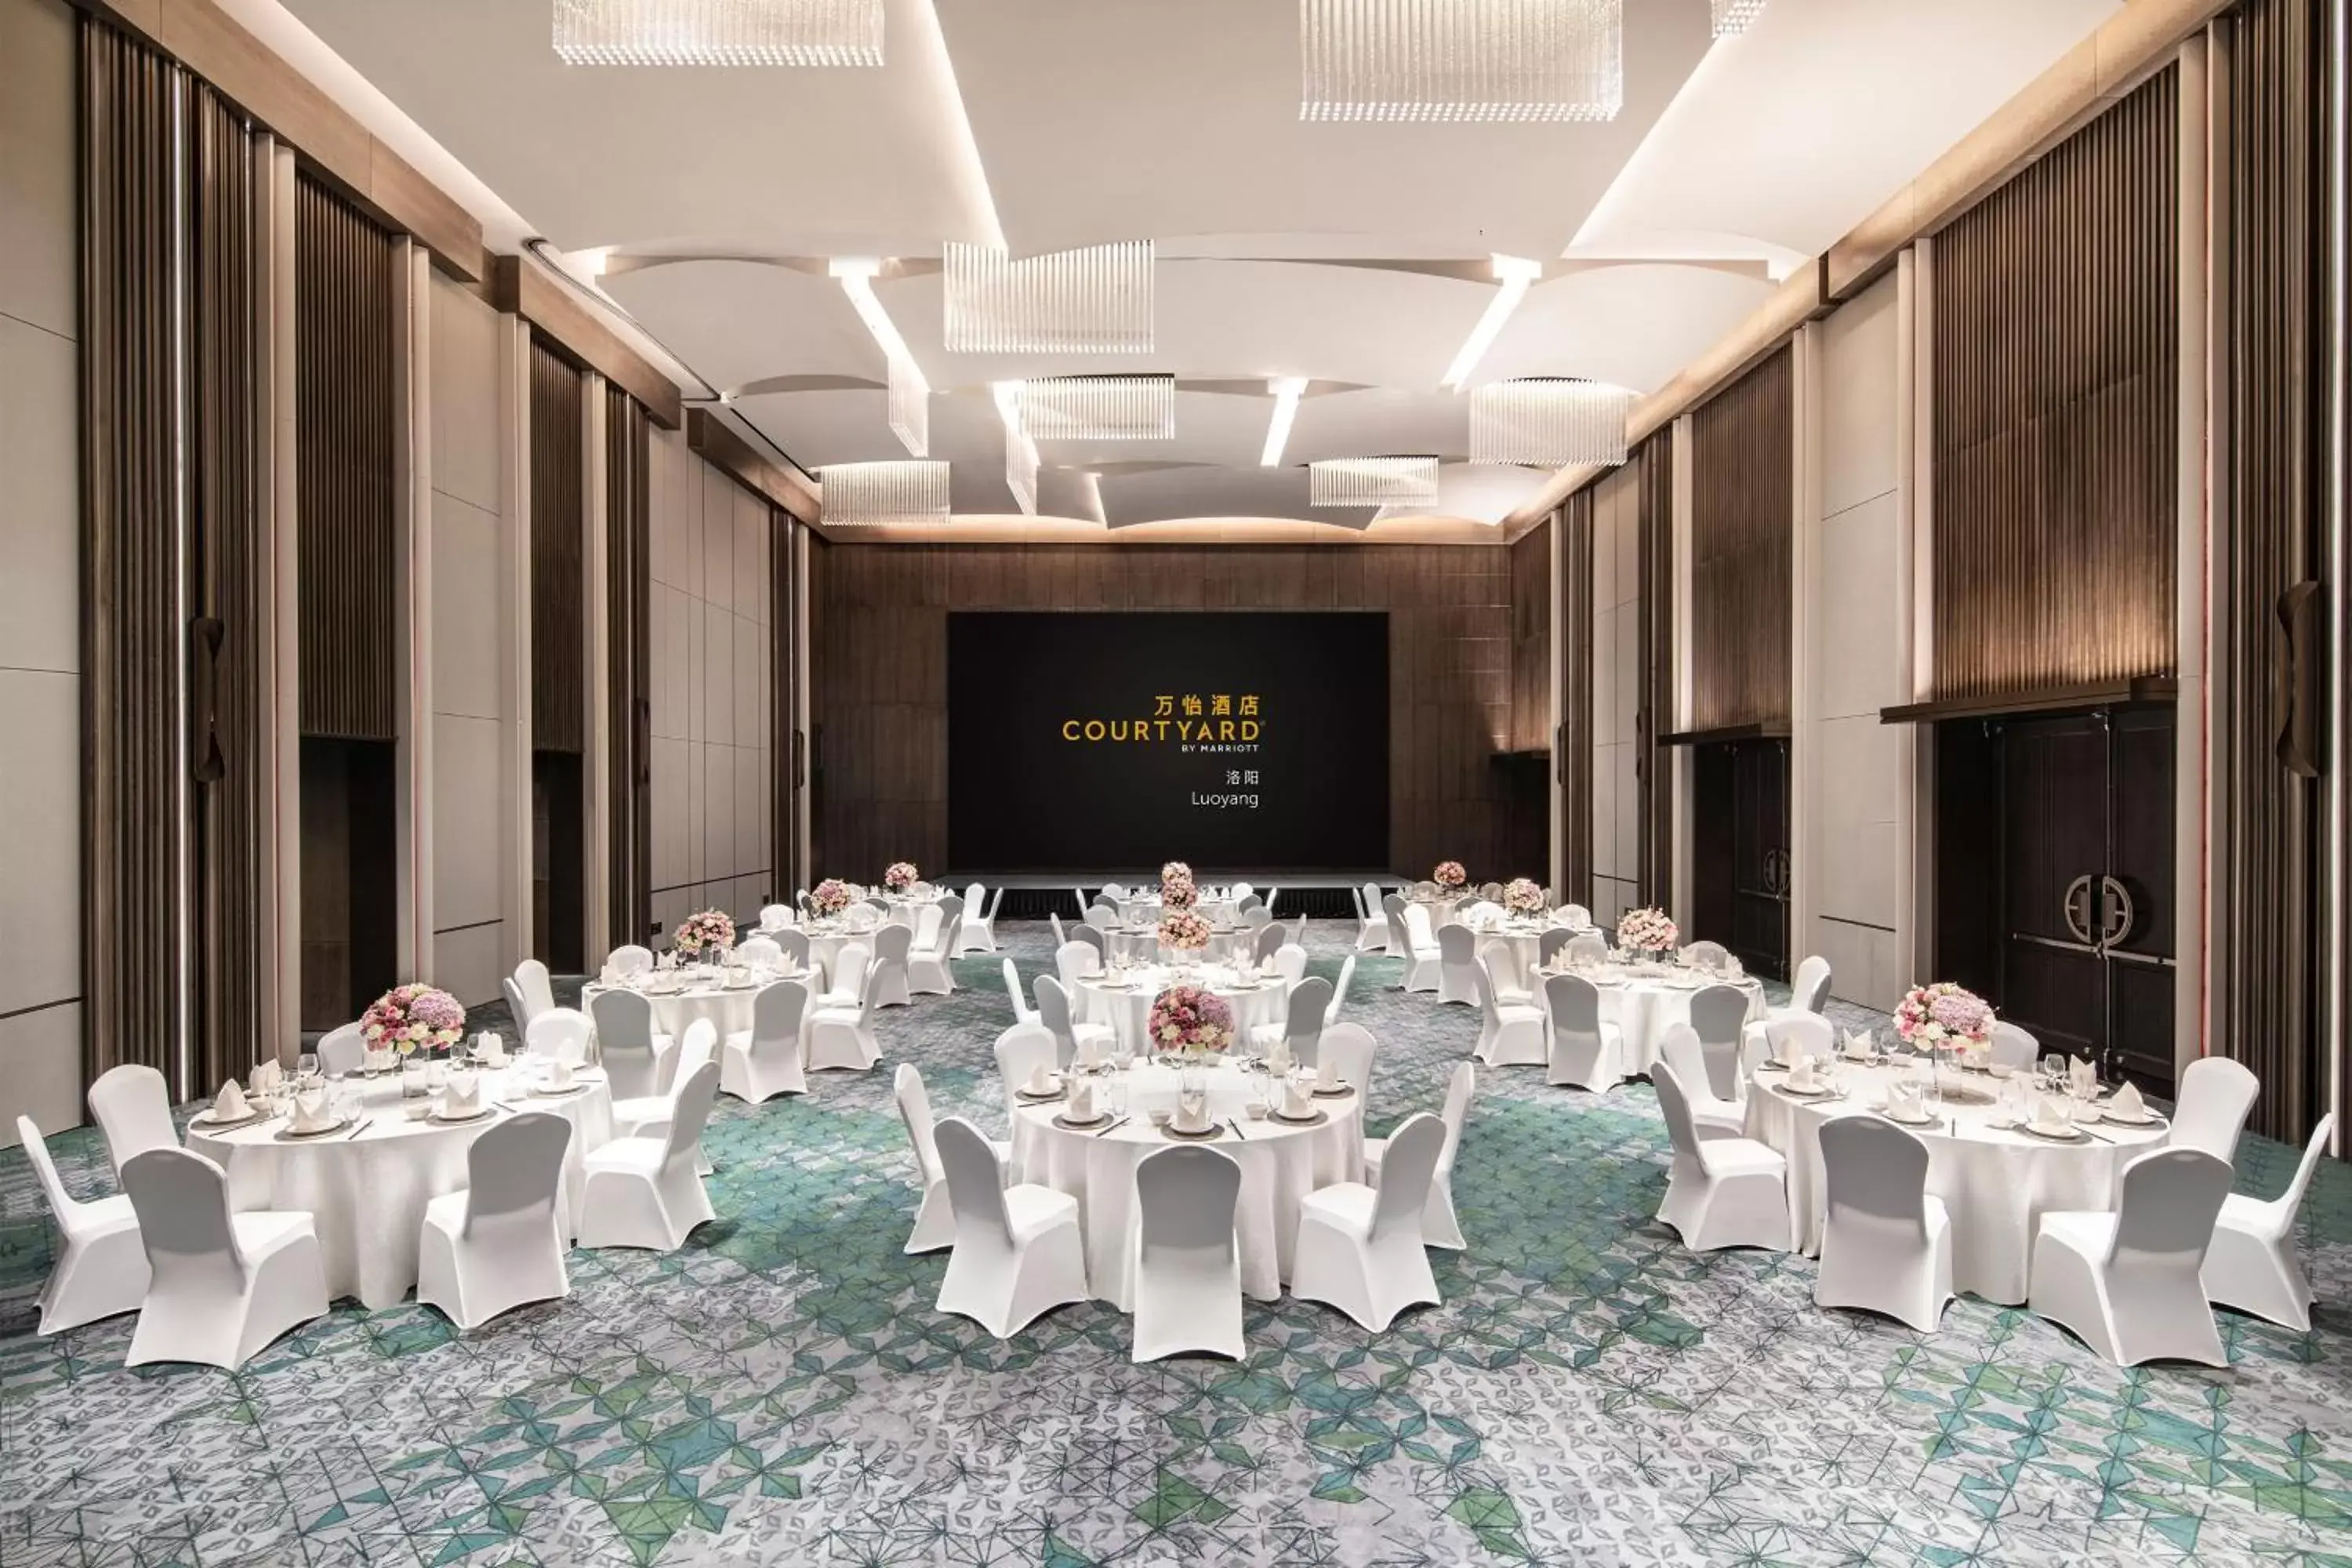 Meeting/conference room, Banquet Facilities in Courtyard by Marriott Luoyang